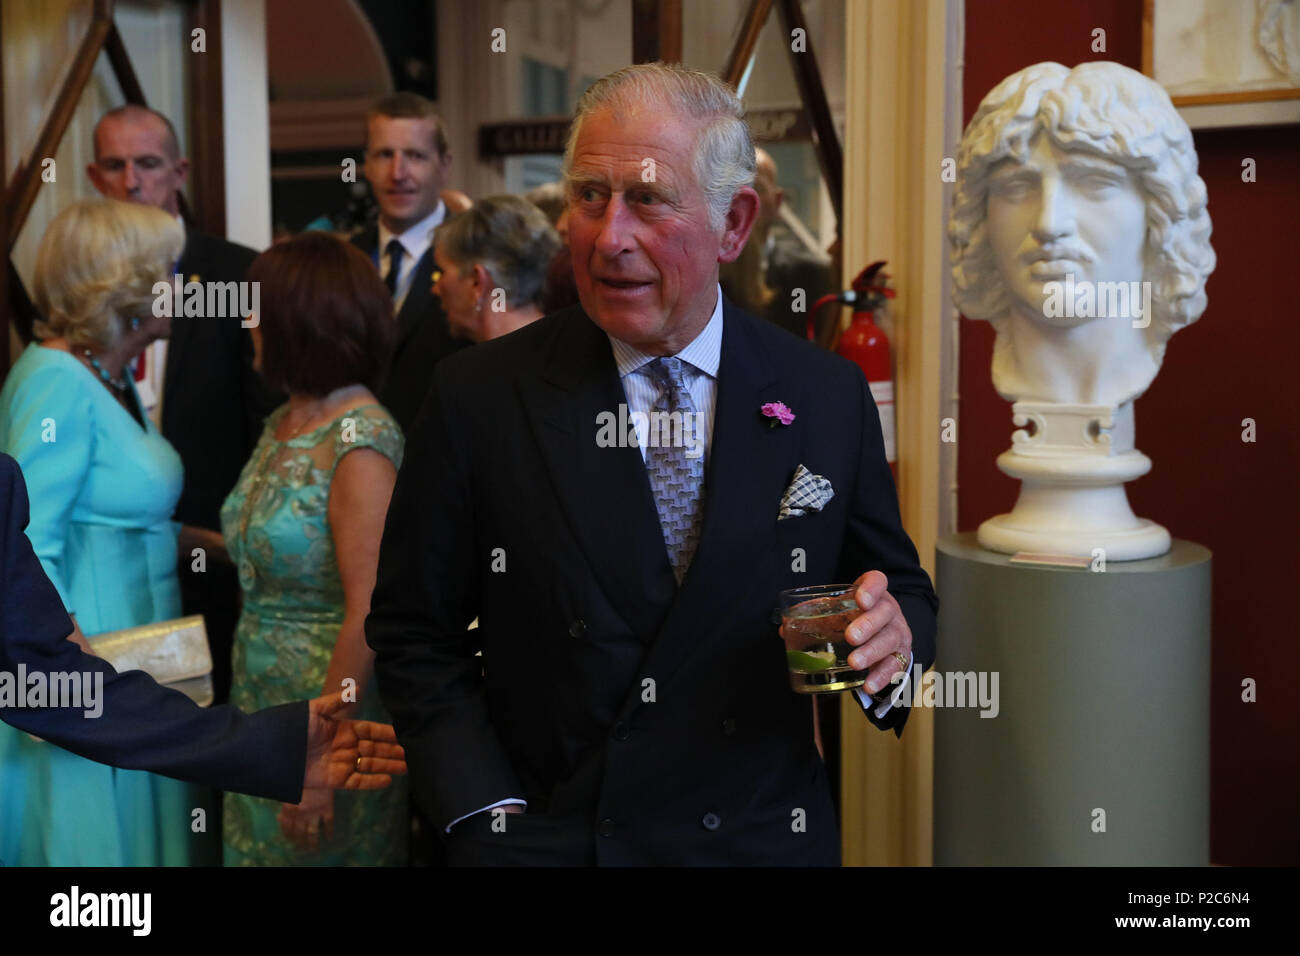 The Prince of Wales as he attends a dinner at Crawford Art Gallery as part of his tour of the Republic of Ireland with the Duchess of Cornwall. PRESS ASSOCIATION Photo. PRESS ASSOCIATION Photo. Picture date: Thursday June 14, 2018. See PA story ROYAL Charles. Photo credit should read: Brian Lawless/PA Wire Stock Photo